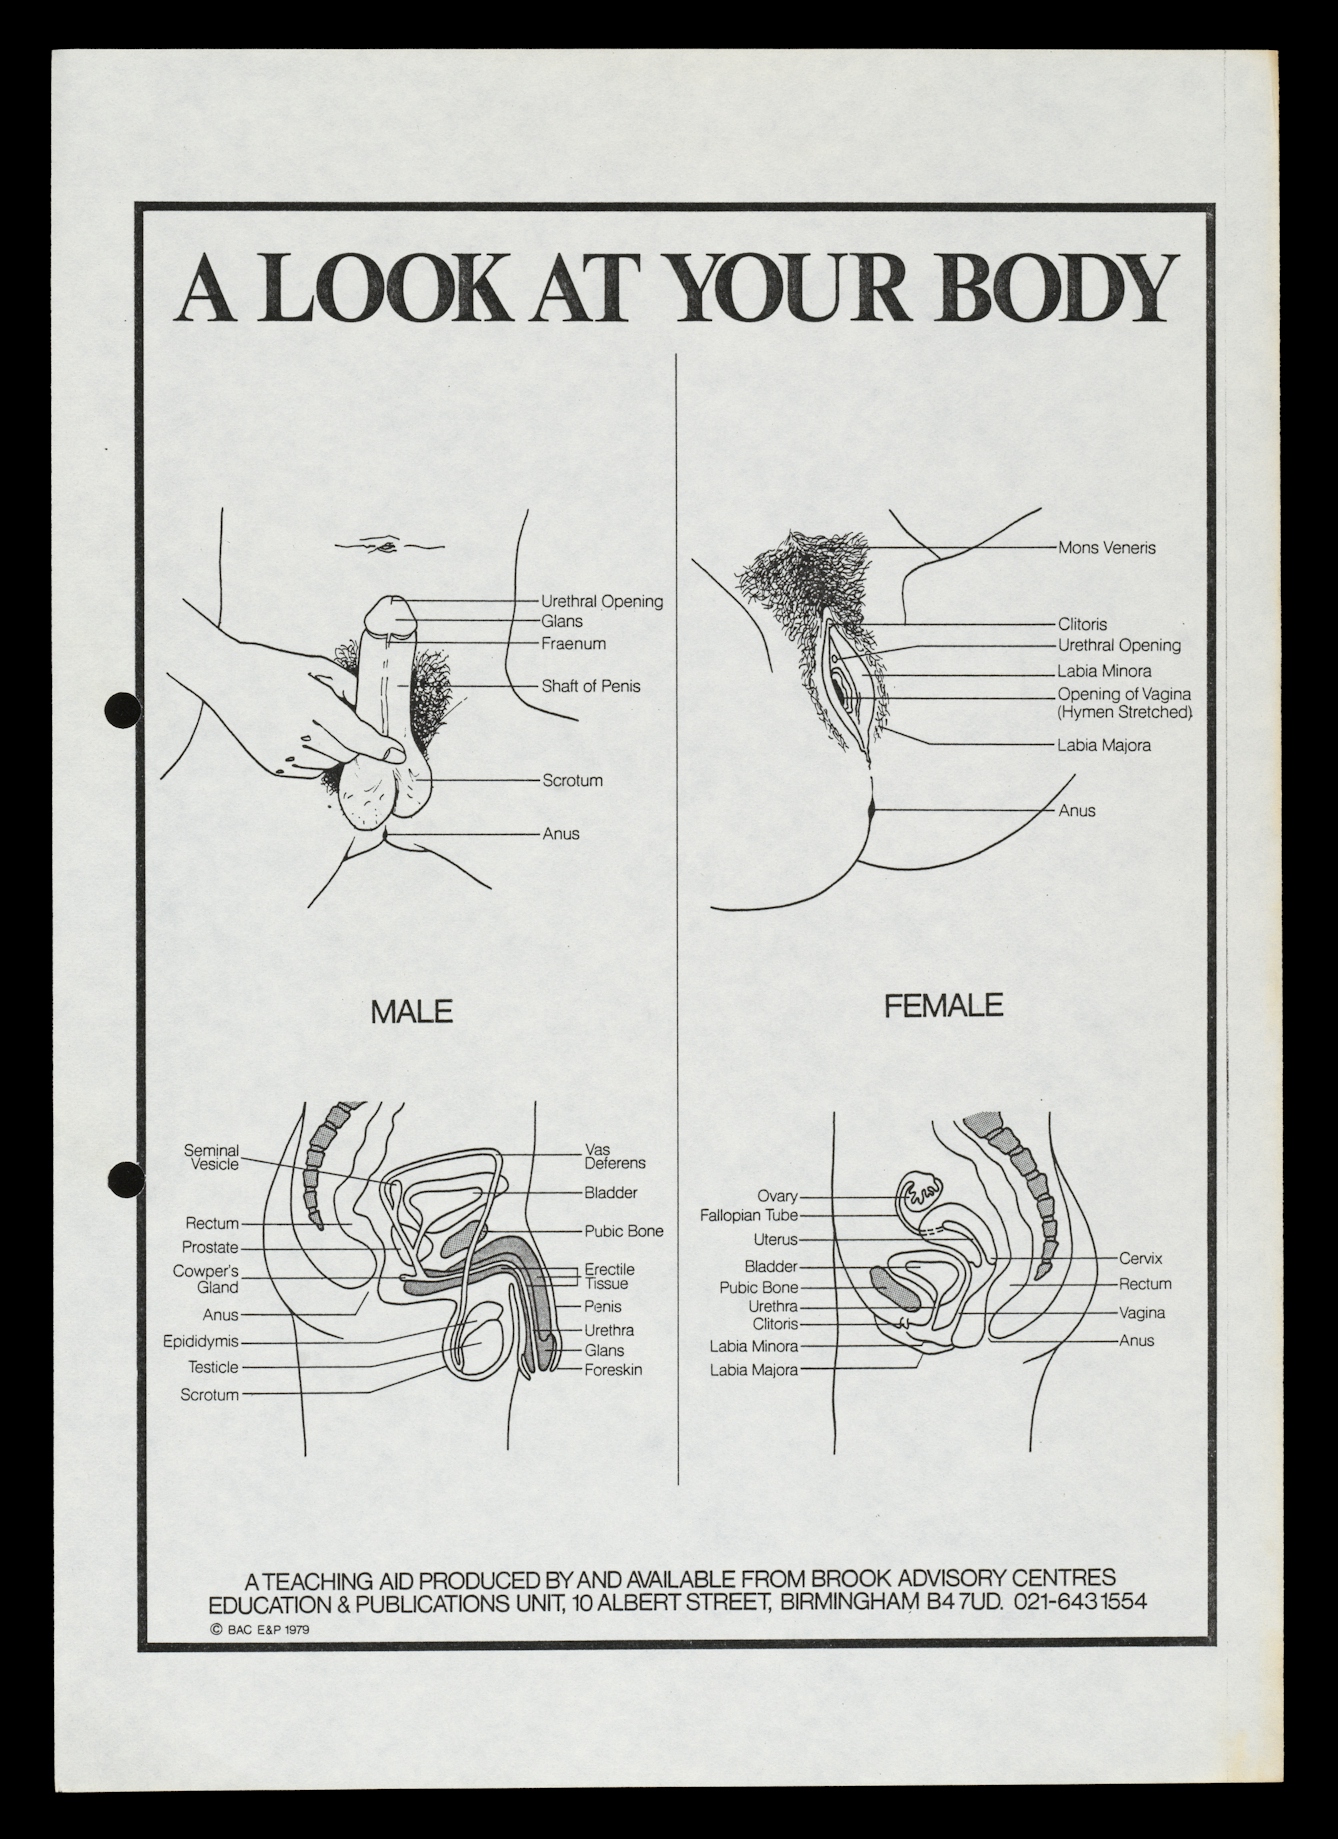 Photograph of archive material from the 1980s against a black background. The image shows an A5 sized hole punched leaflet with 4 diagrams of the male and female reproductive organs. Above the diagrams are the words 'A look at your body'. The top two diagrams show labelled views of the external reproductive organs, with the male on the left and female on the right. The two diagrams below are labelled cross-sectional drawings of the internal reproductive organs, again male on the left and female on the right.